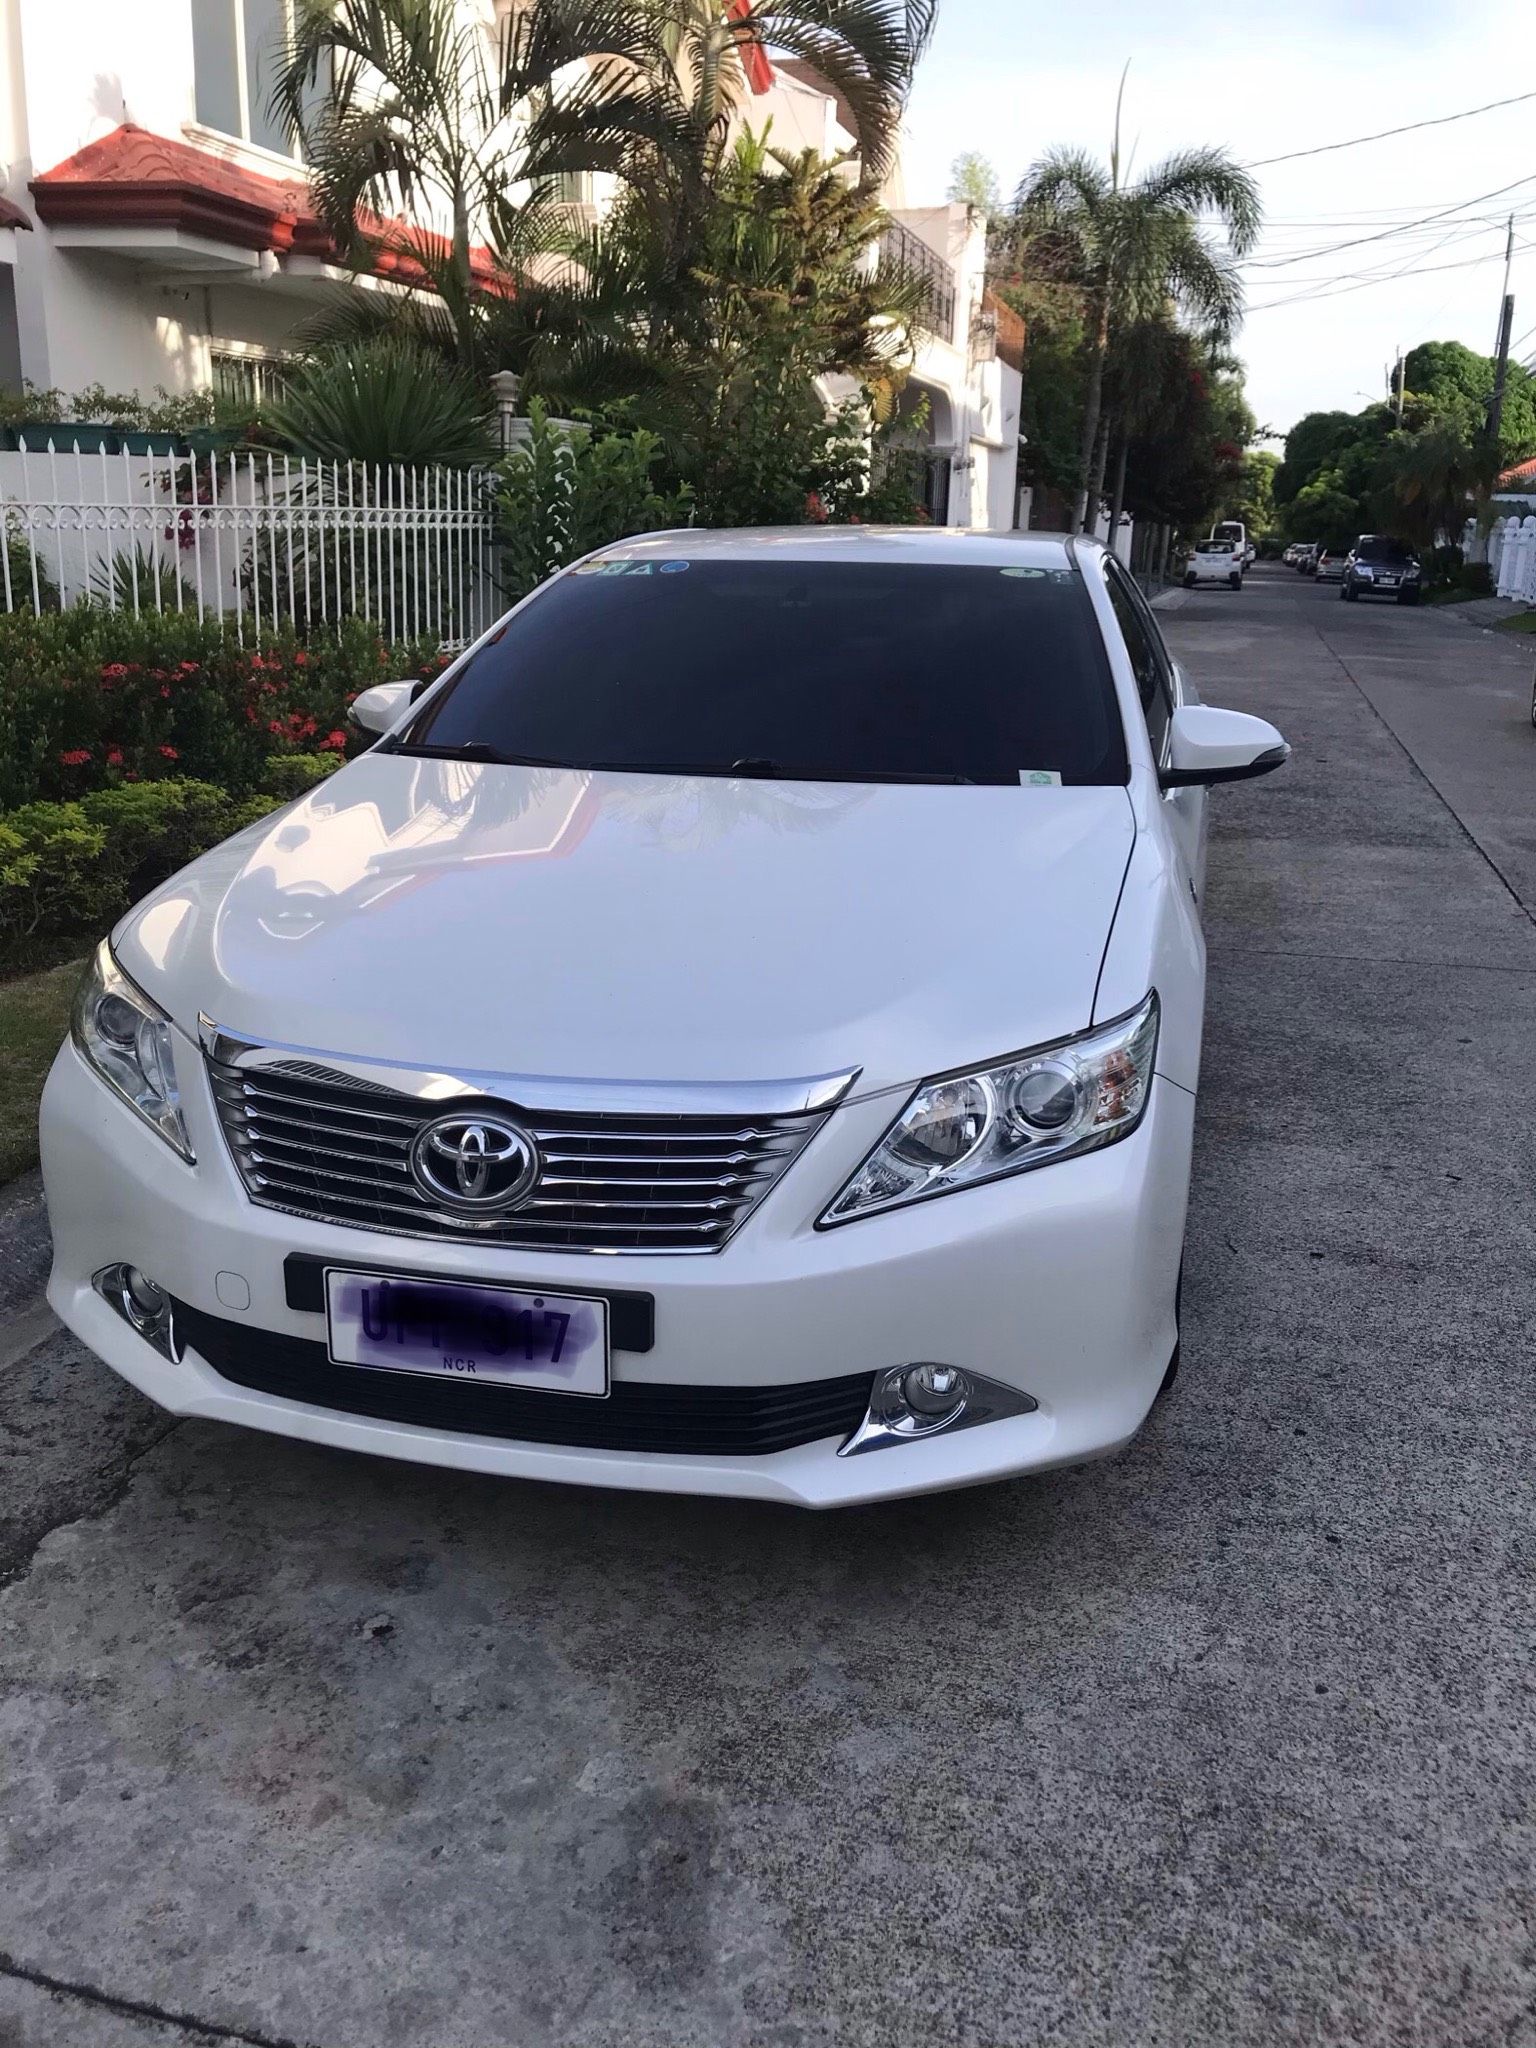 Used 2013 Toyota Camry 2.5G